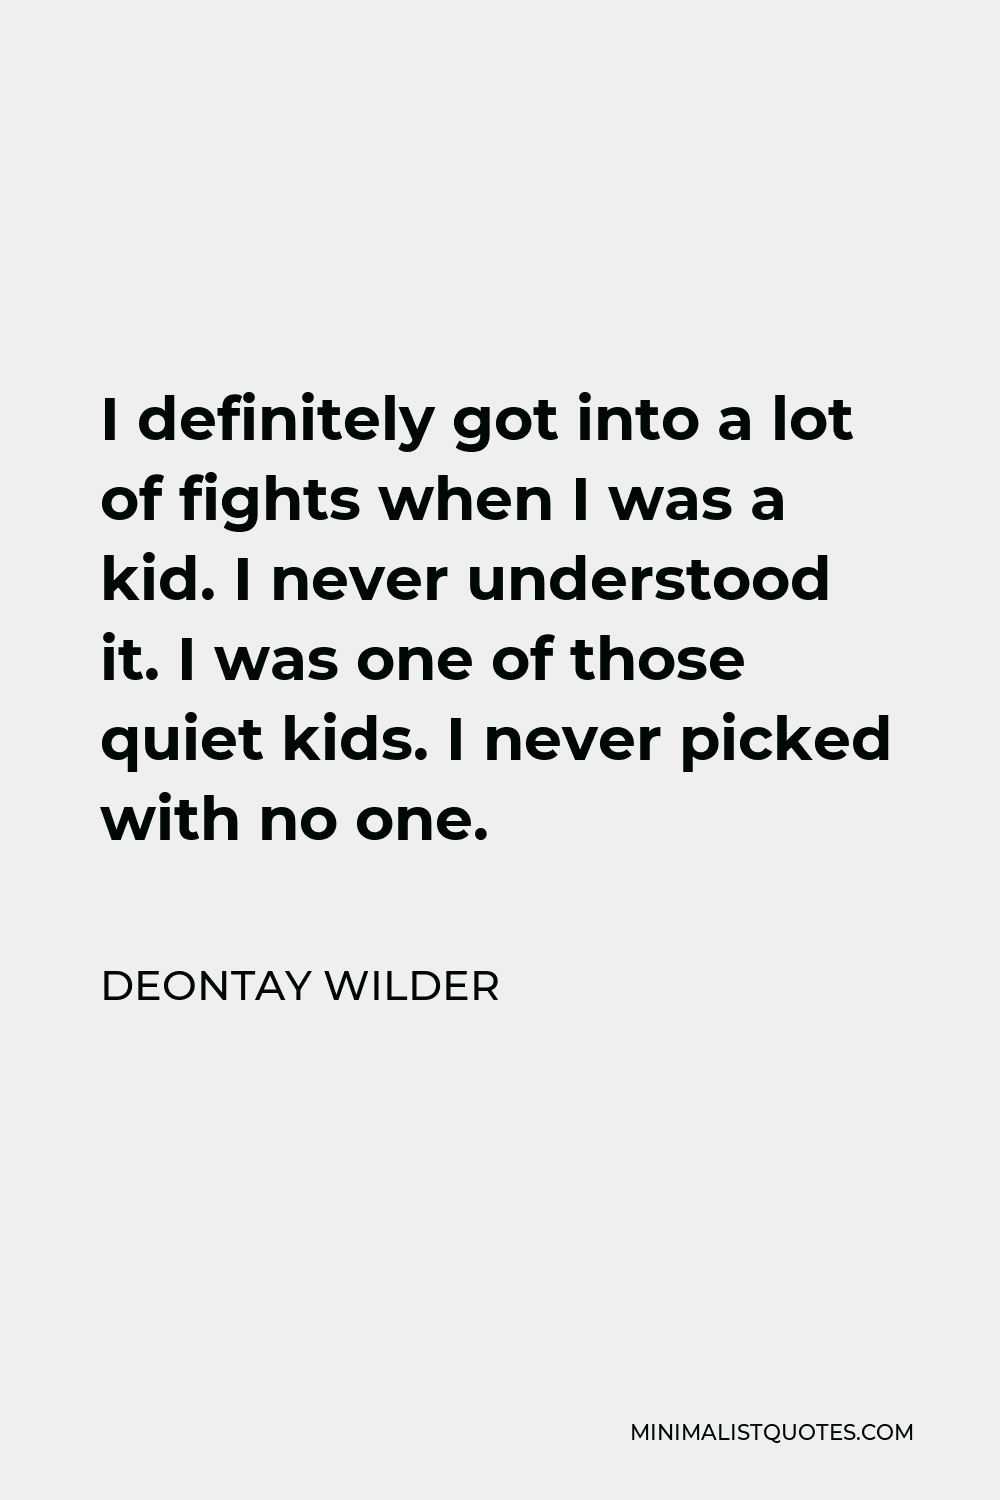 Deontay Wilder Quote - I definitely got into a lot of fights when I was a kid. I never understood it. I was one of those quiet kids. I never picked with no one.